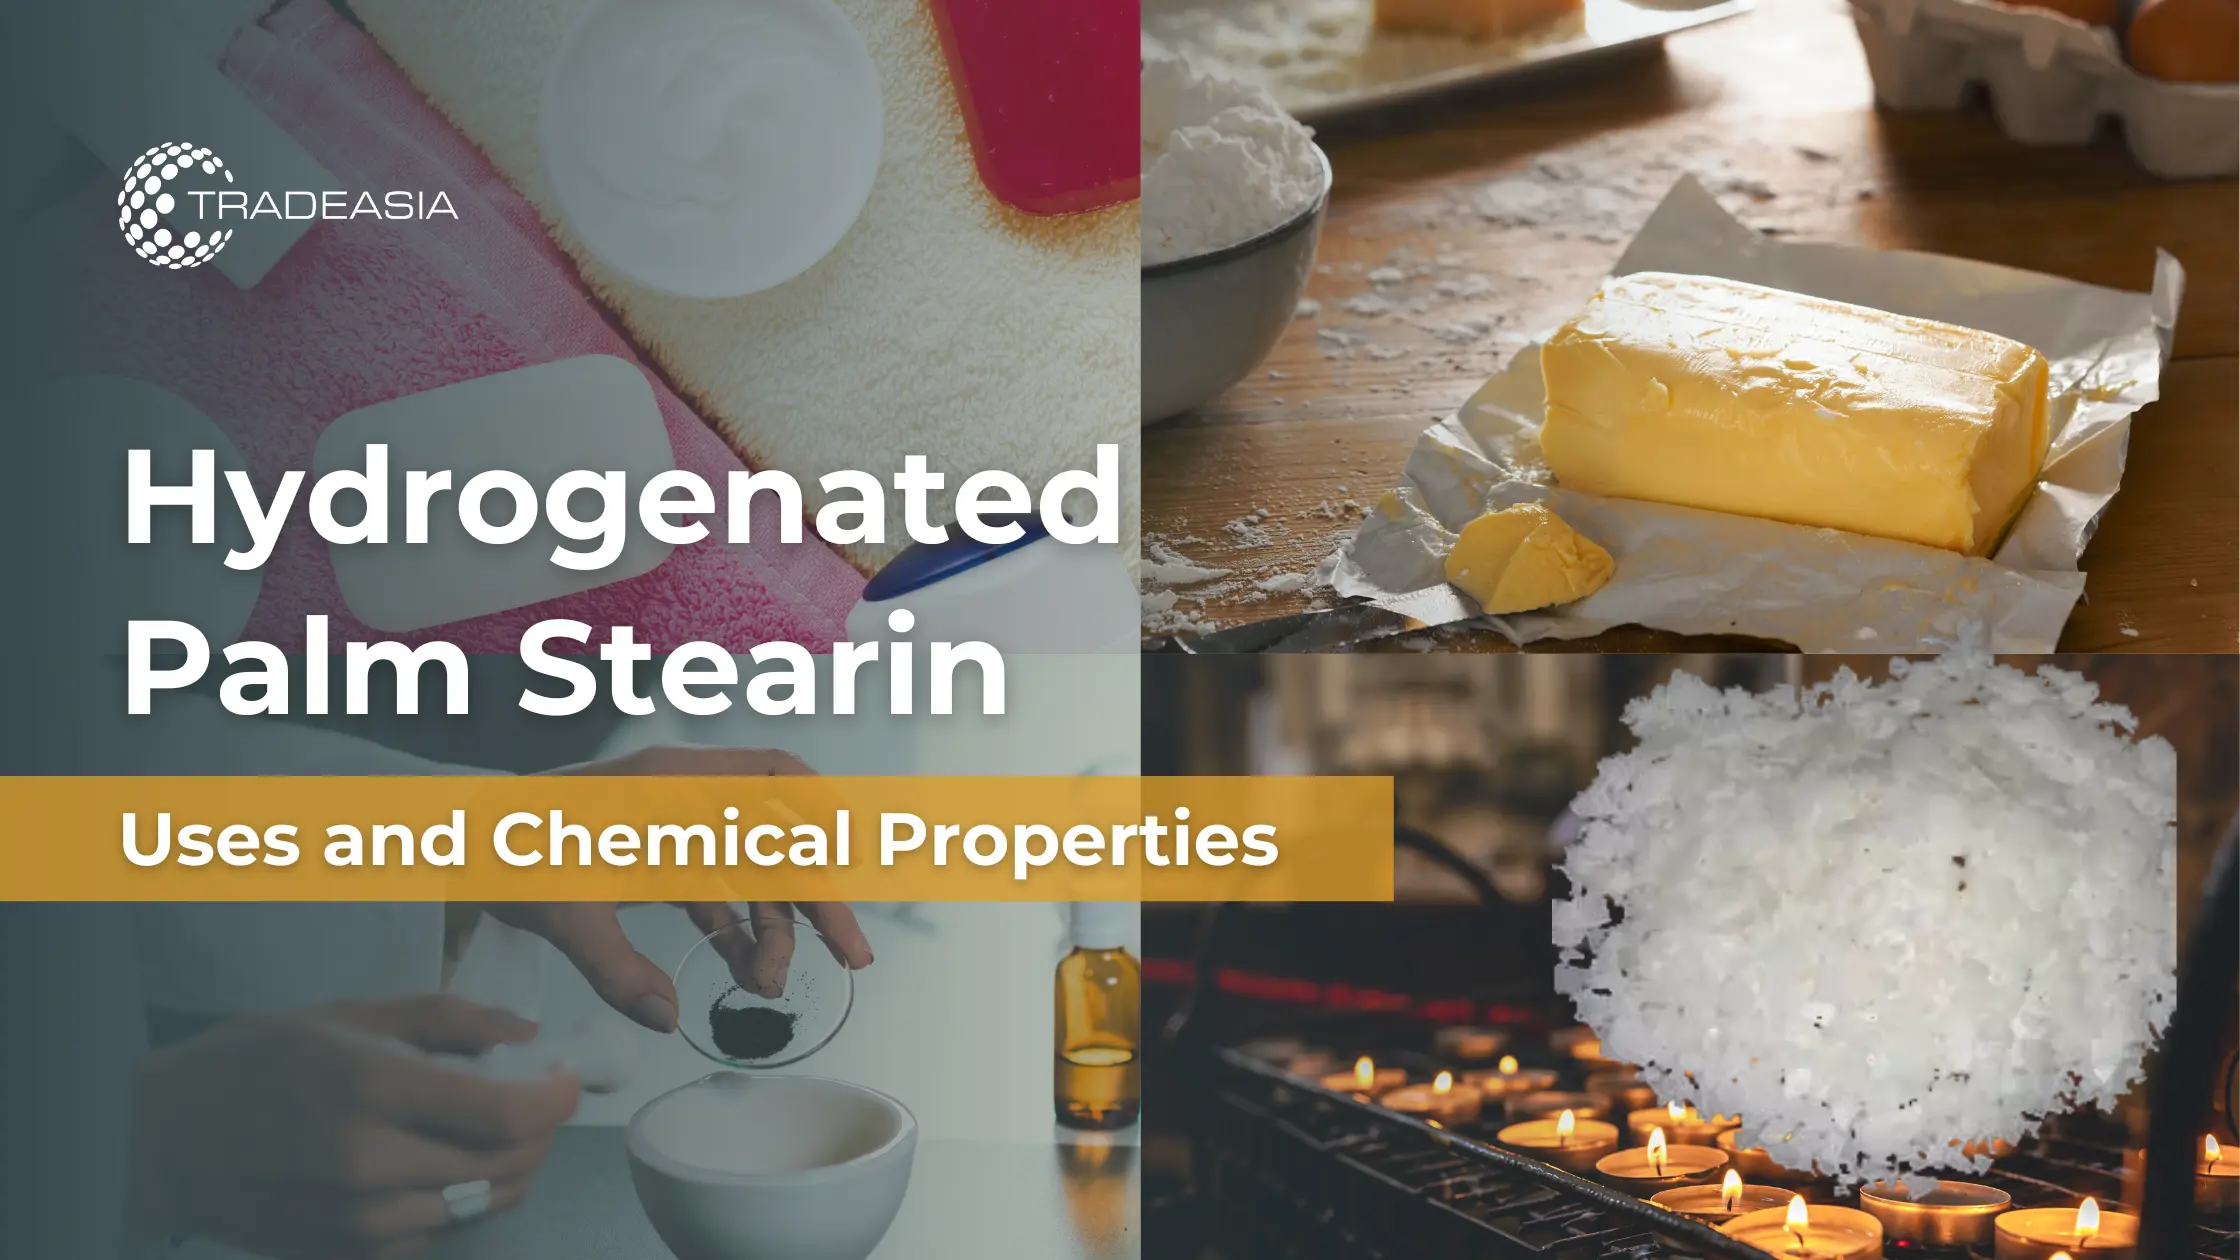 Hydrogenated Palm Stearin Uses and Chemical Properties